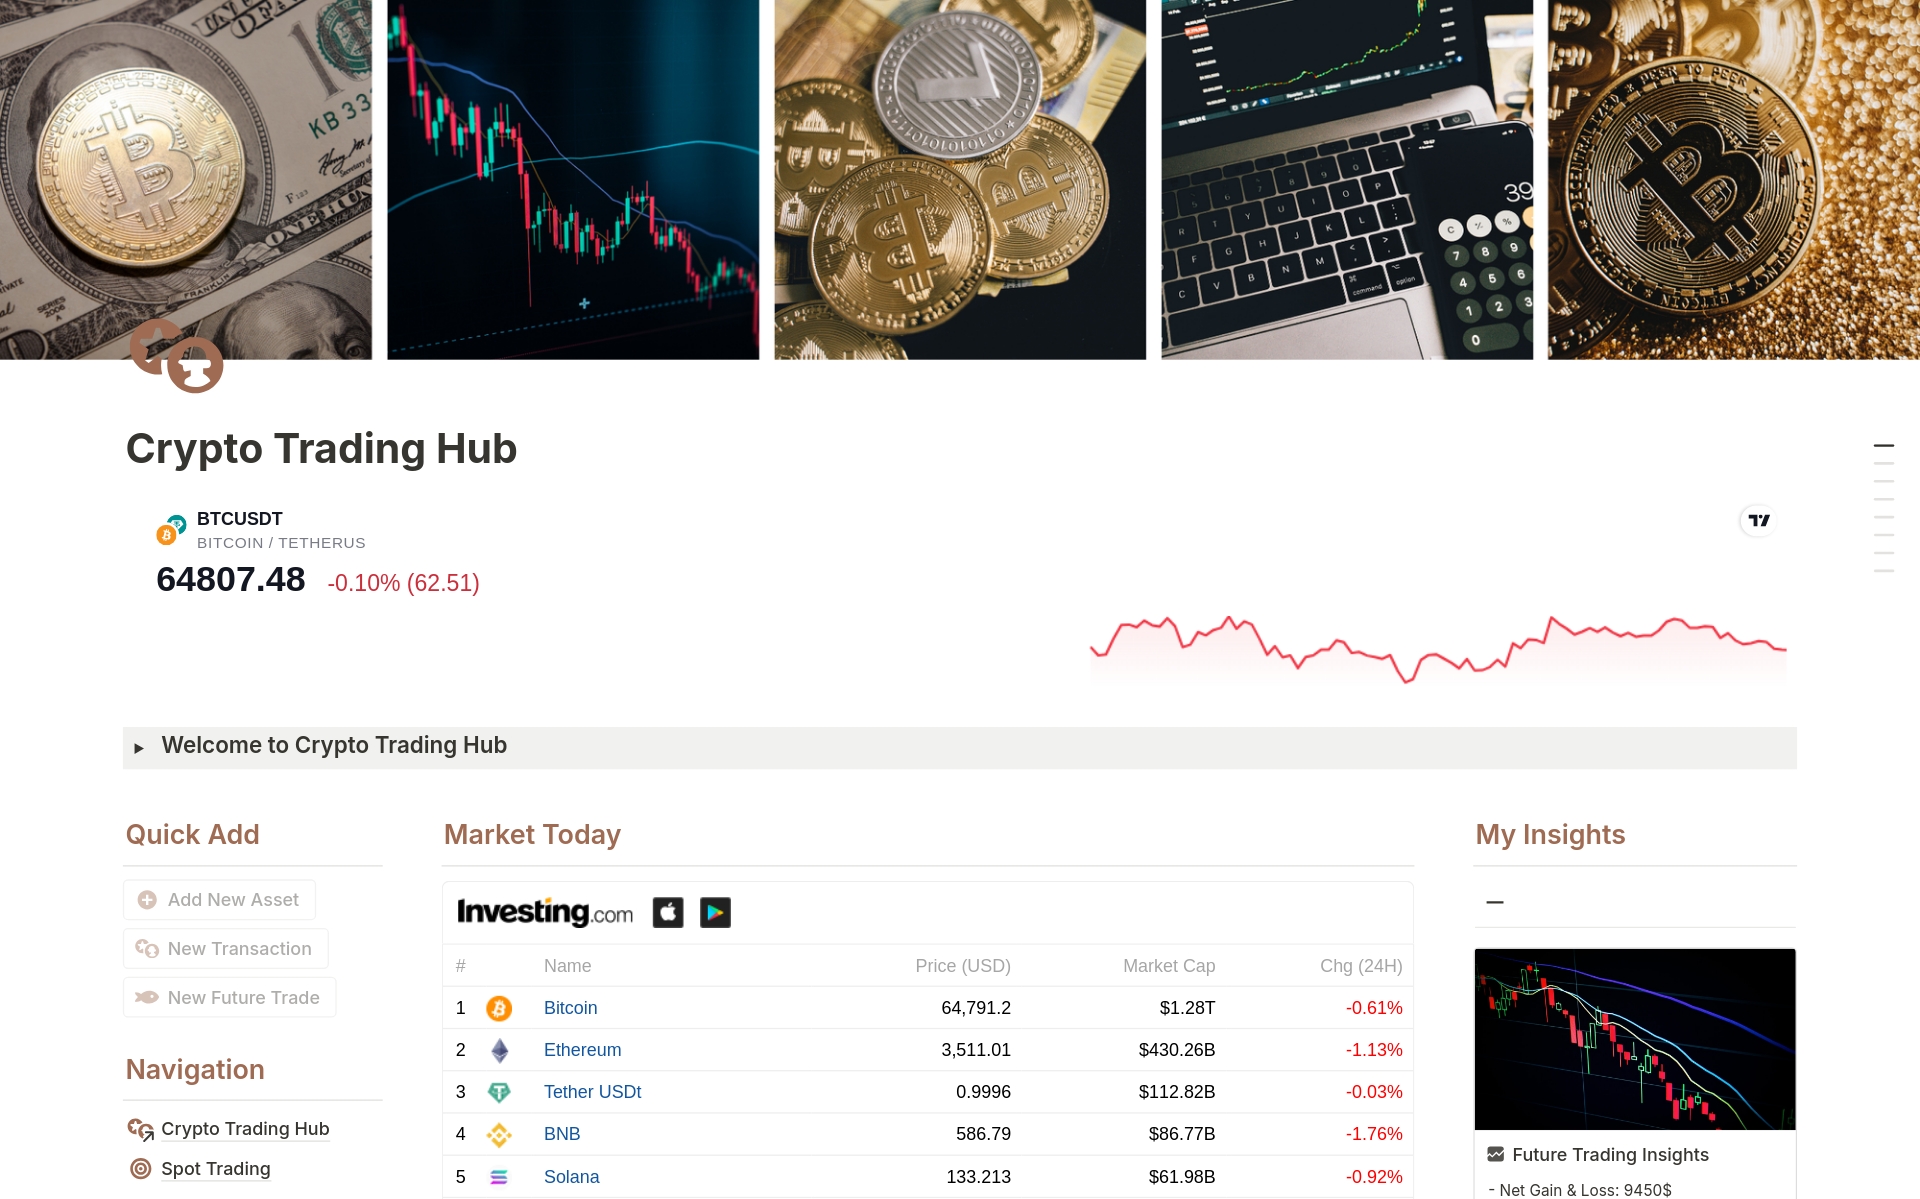 Crypto Trading Hub provides real-time market insights, portfolio management, future trading insights, and a position size calculator. Stay organized with daily routines, notes, and a learning section. Customize it to fit your trading style & elevate your trading experience today!